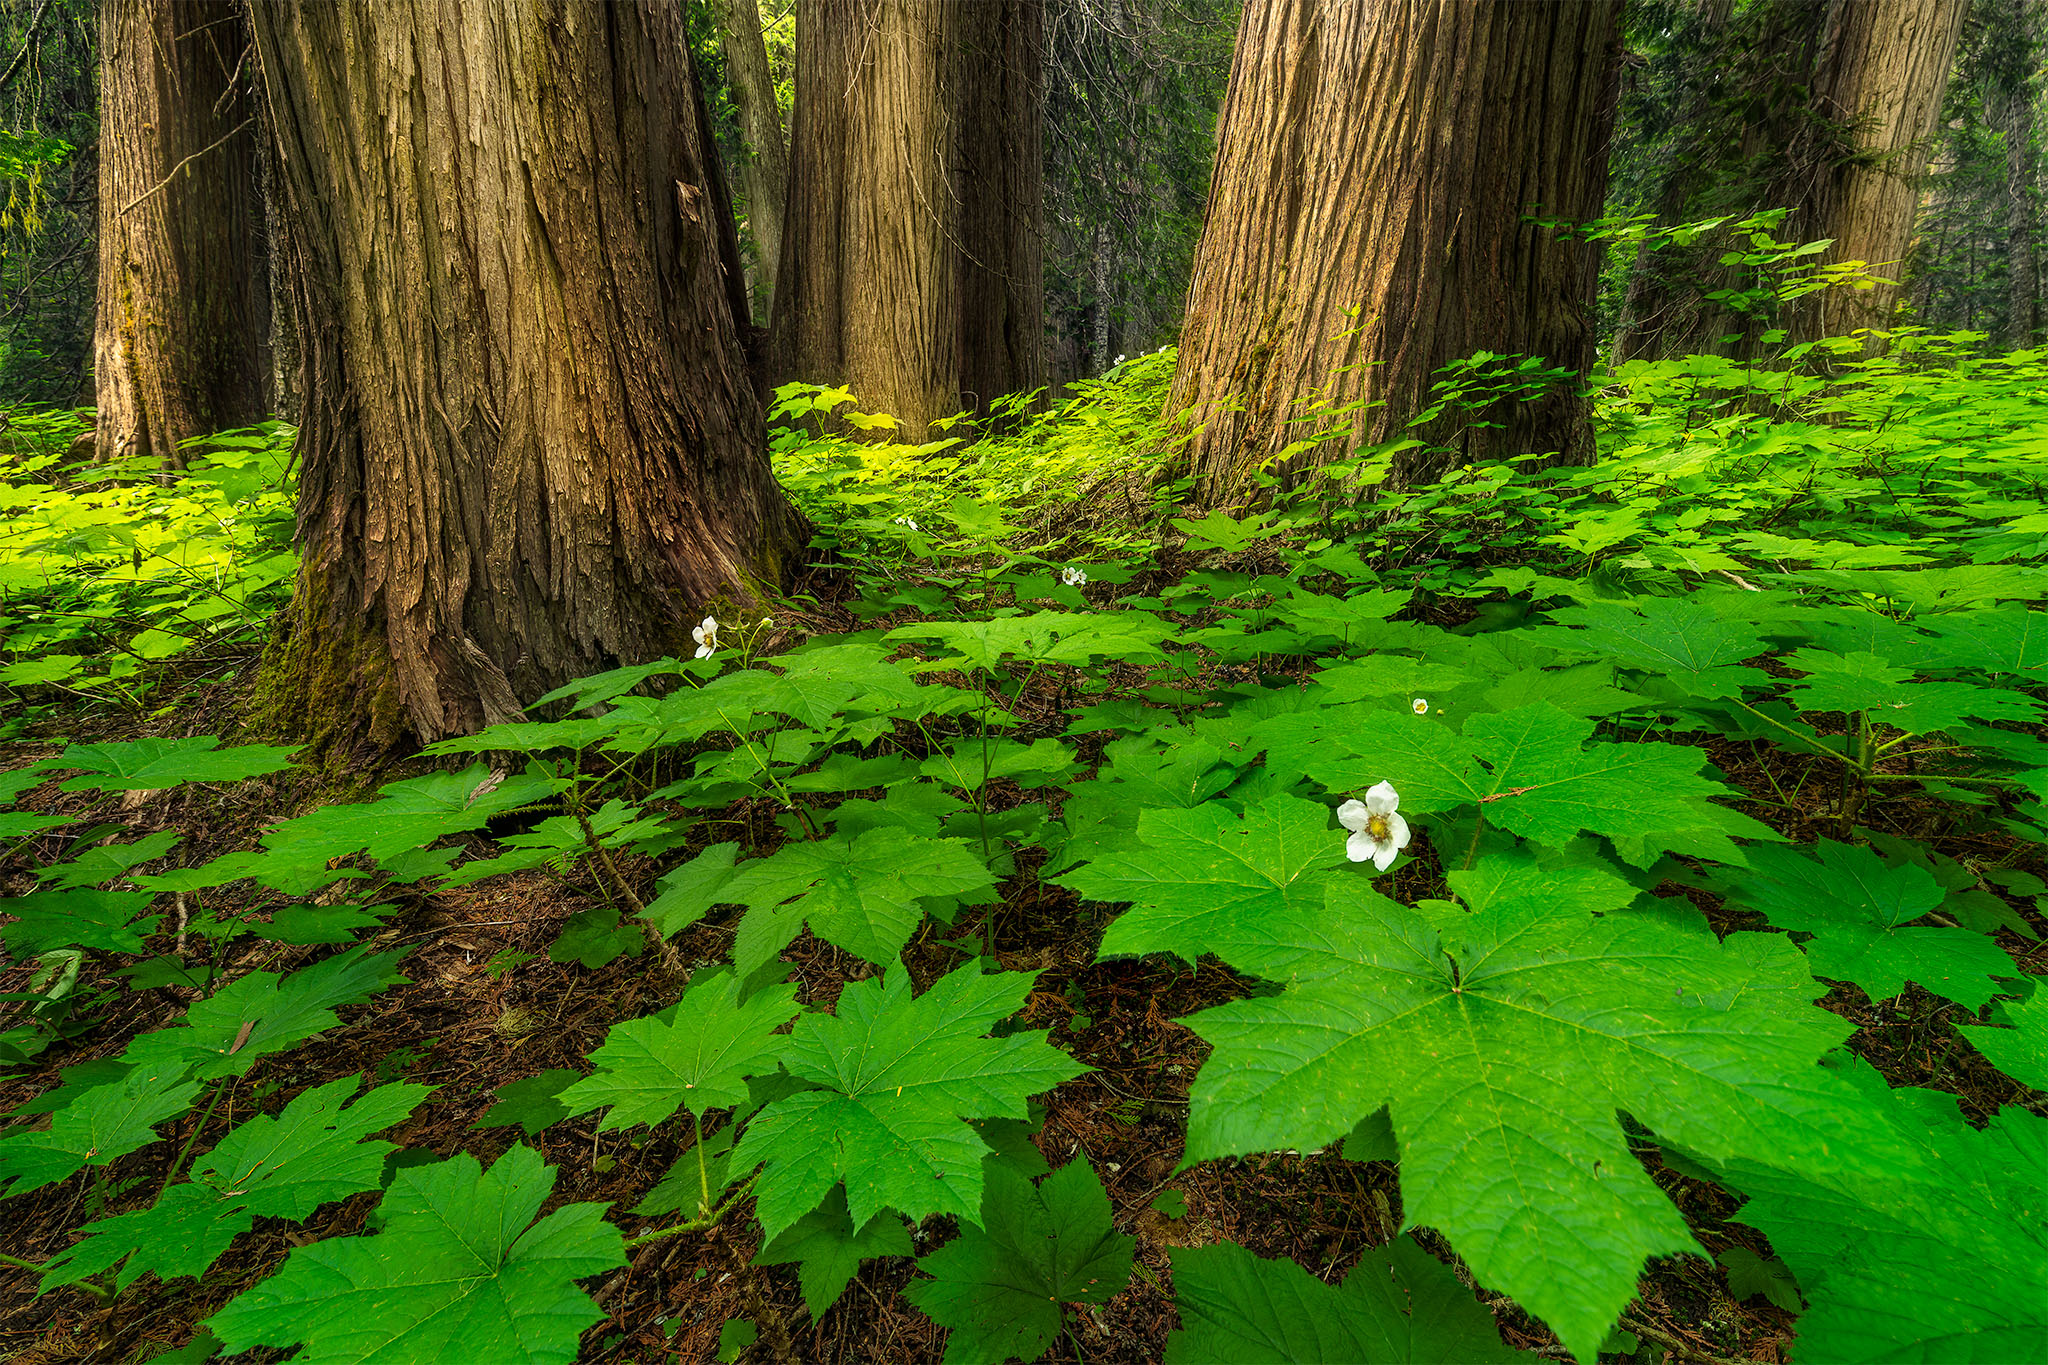 A landscape photograph of old growth forest along the Ancient Cedars Boardwalk near Whistler, British Columbia